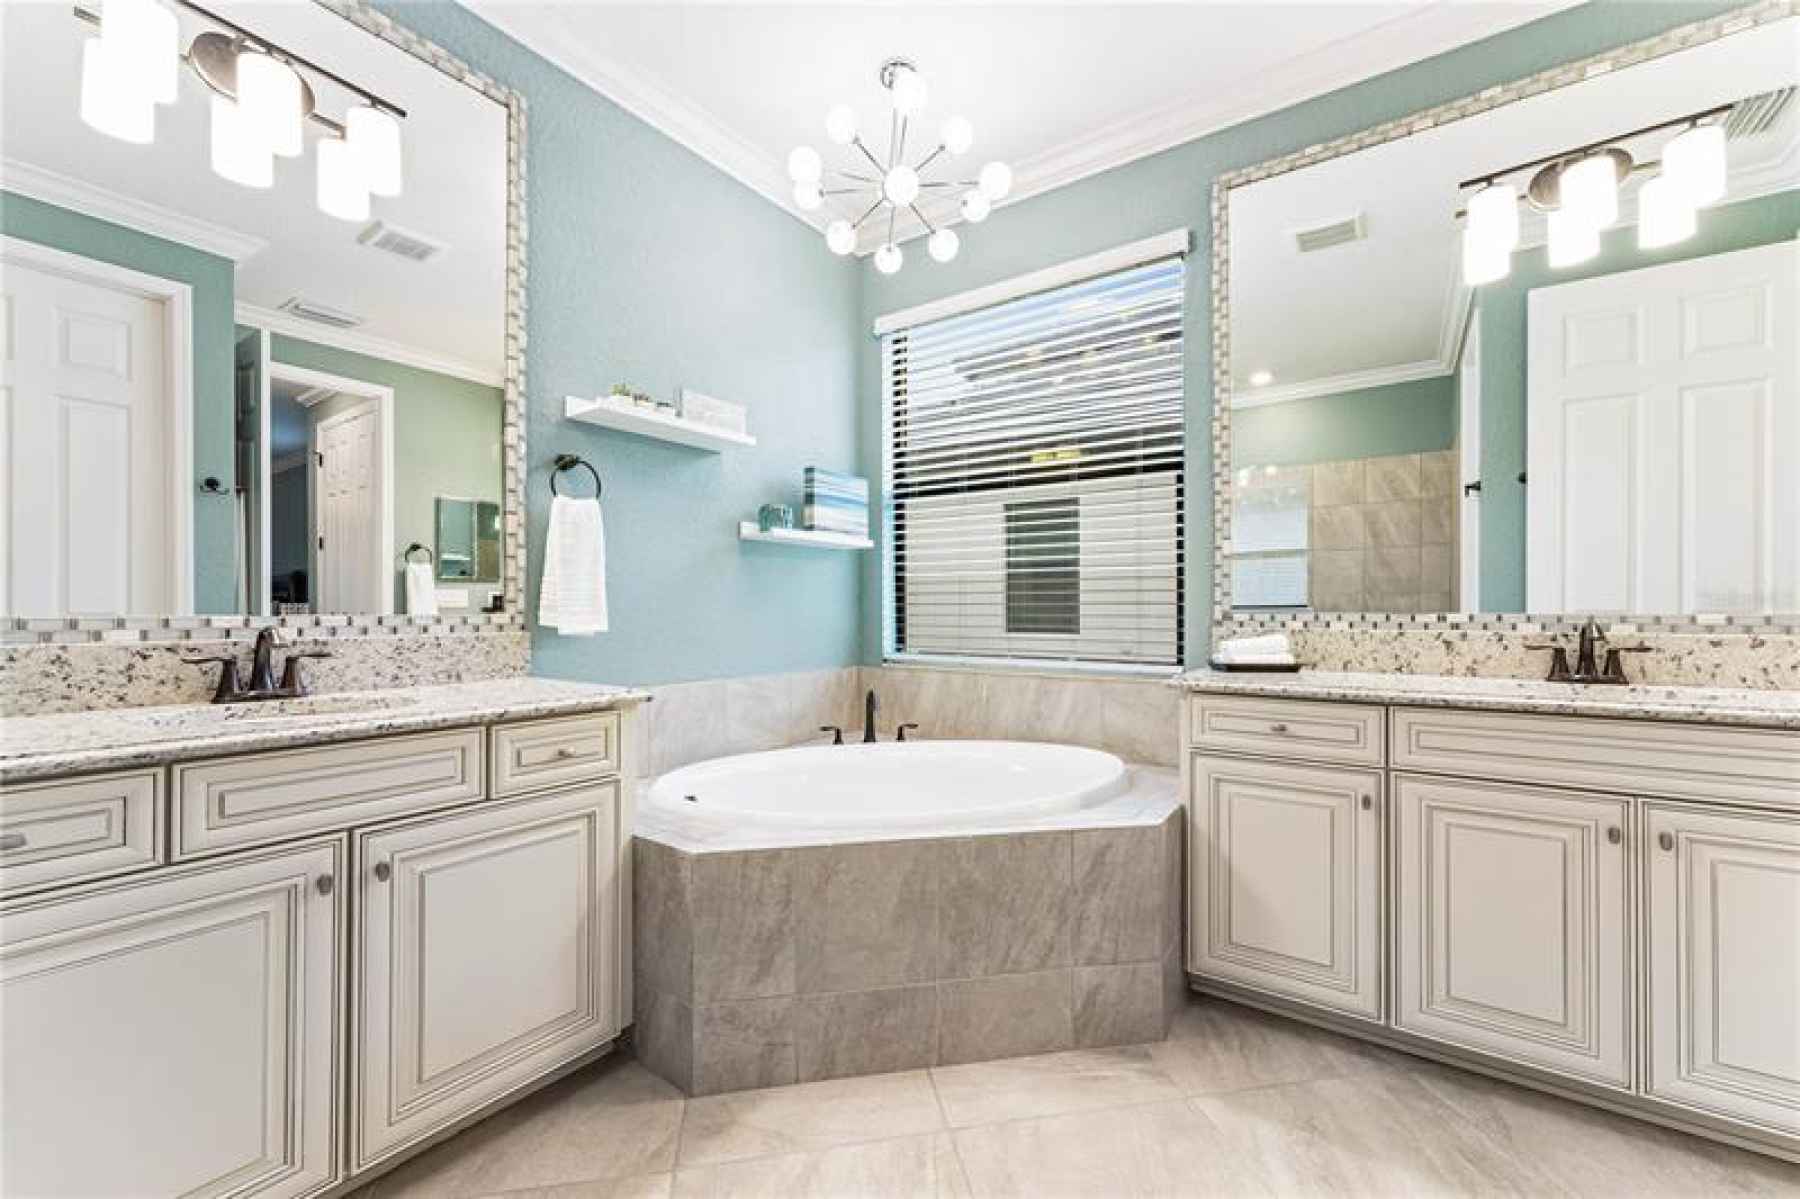 Master bathroom with large soaking tub and a double vanity.